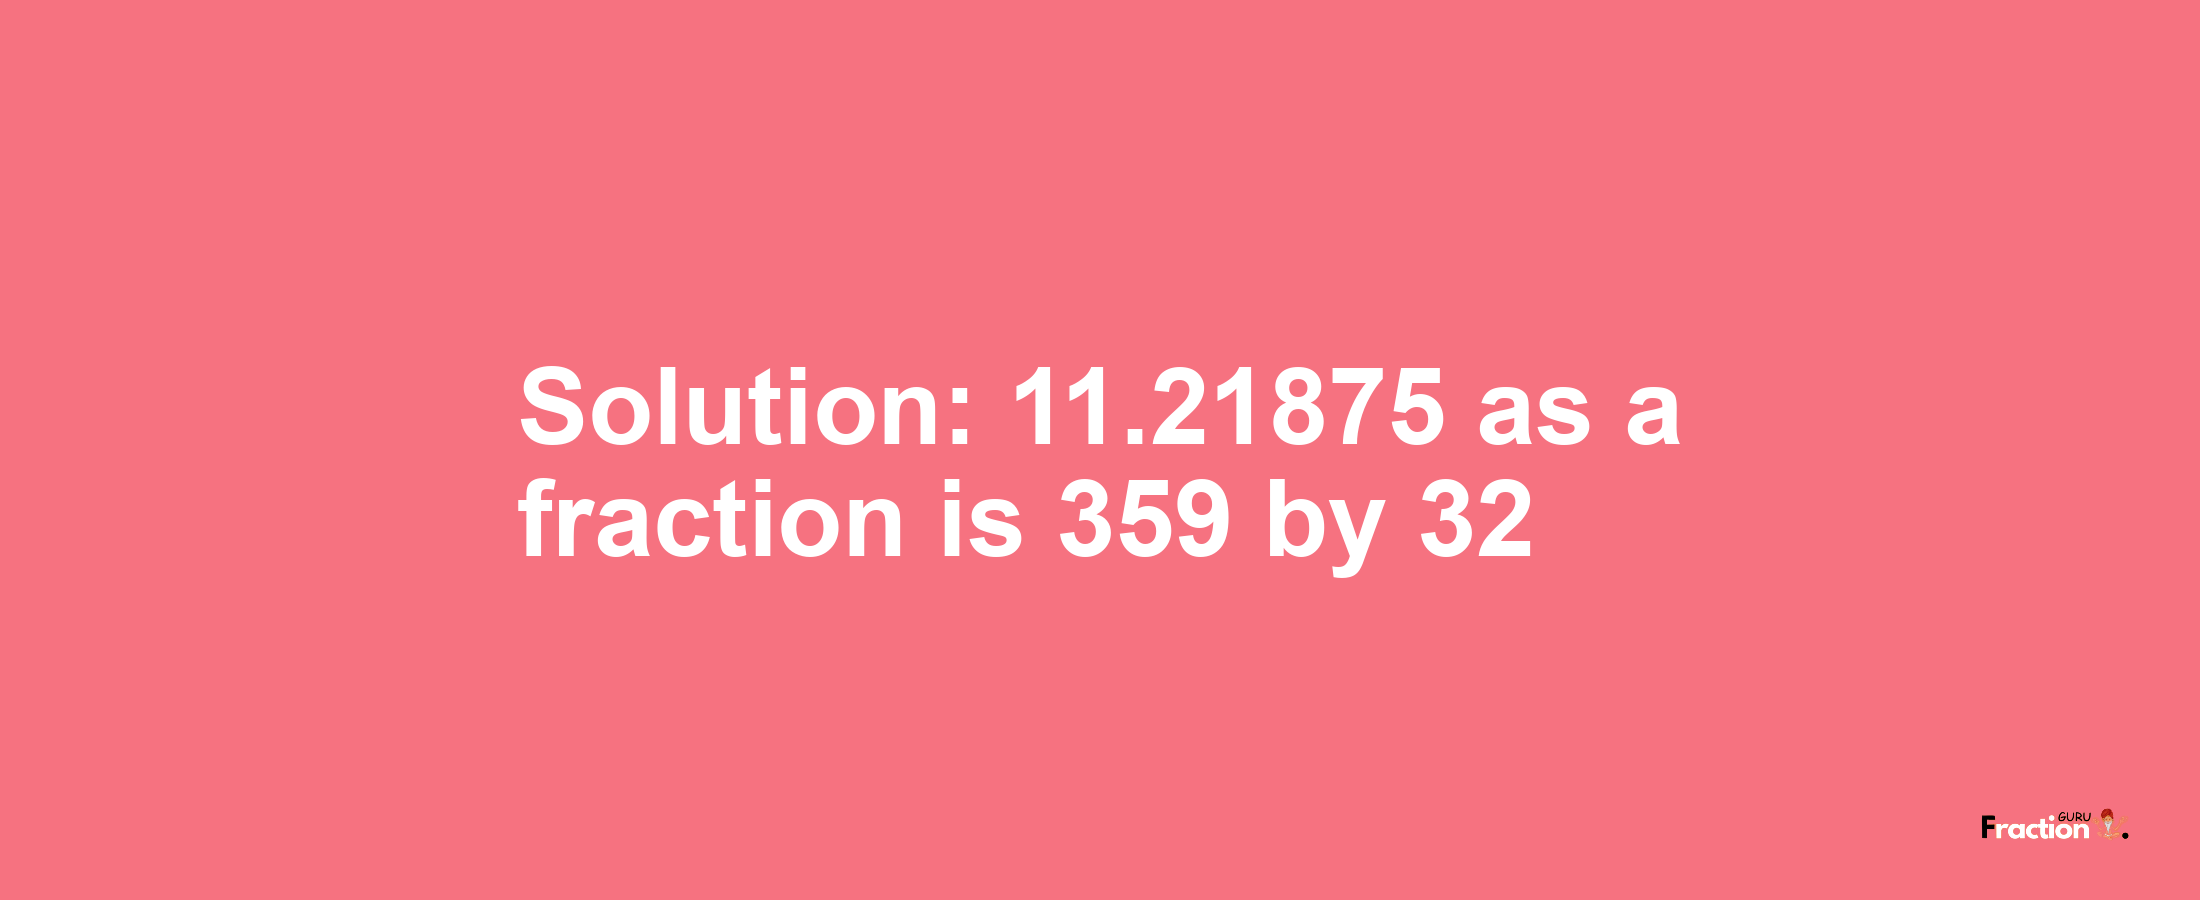 Solution:11.21875 as a fraction is 359/32